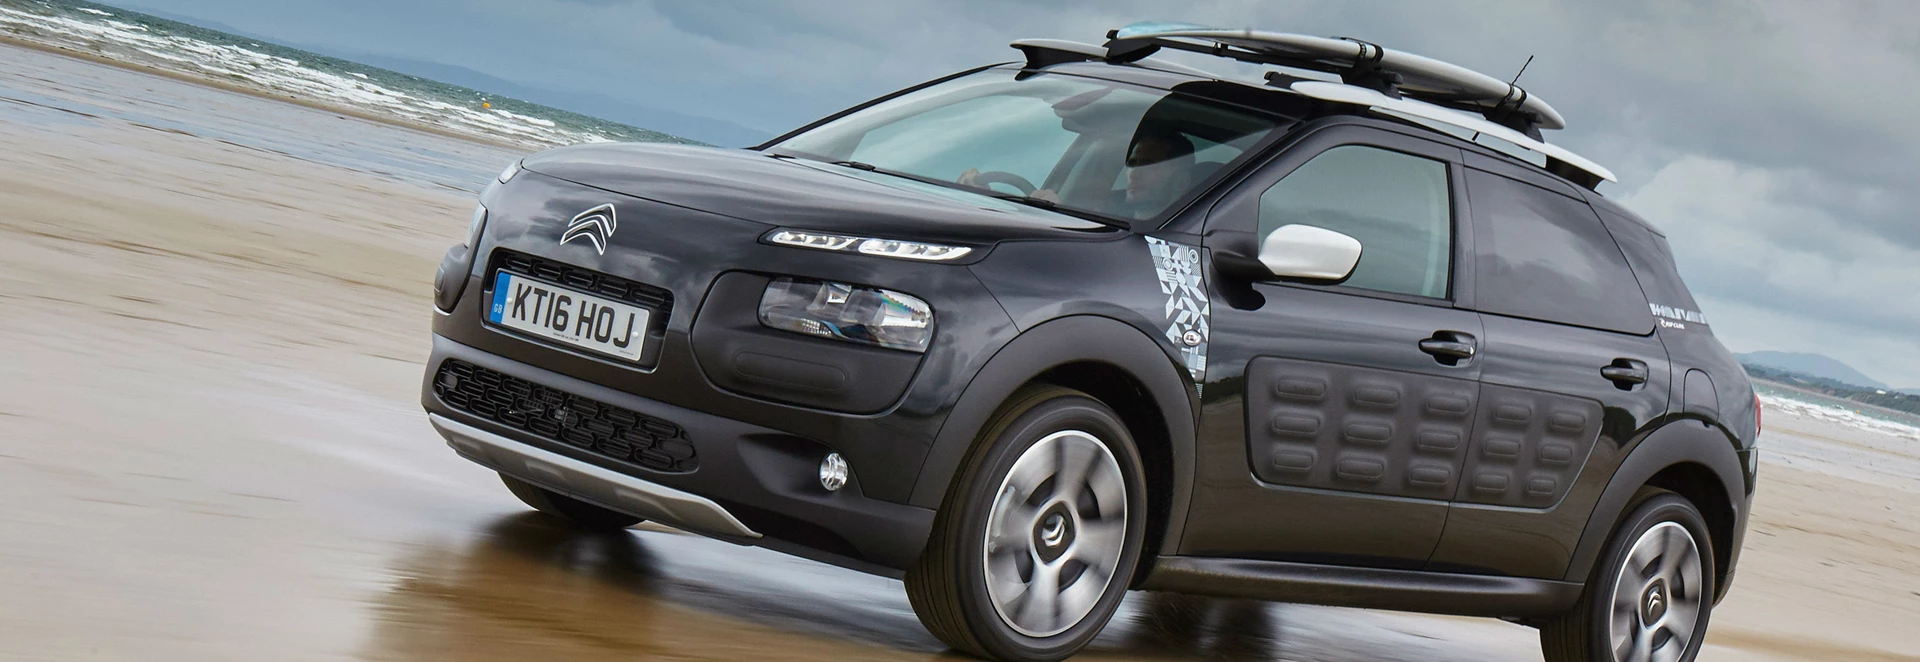 Citroen C4 Cactus to ditch the Airbumps and crossover looks for conventional hatchback design 